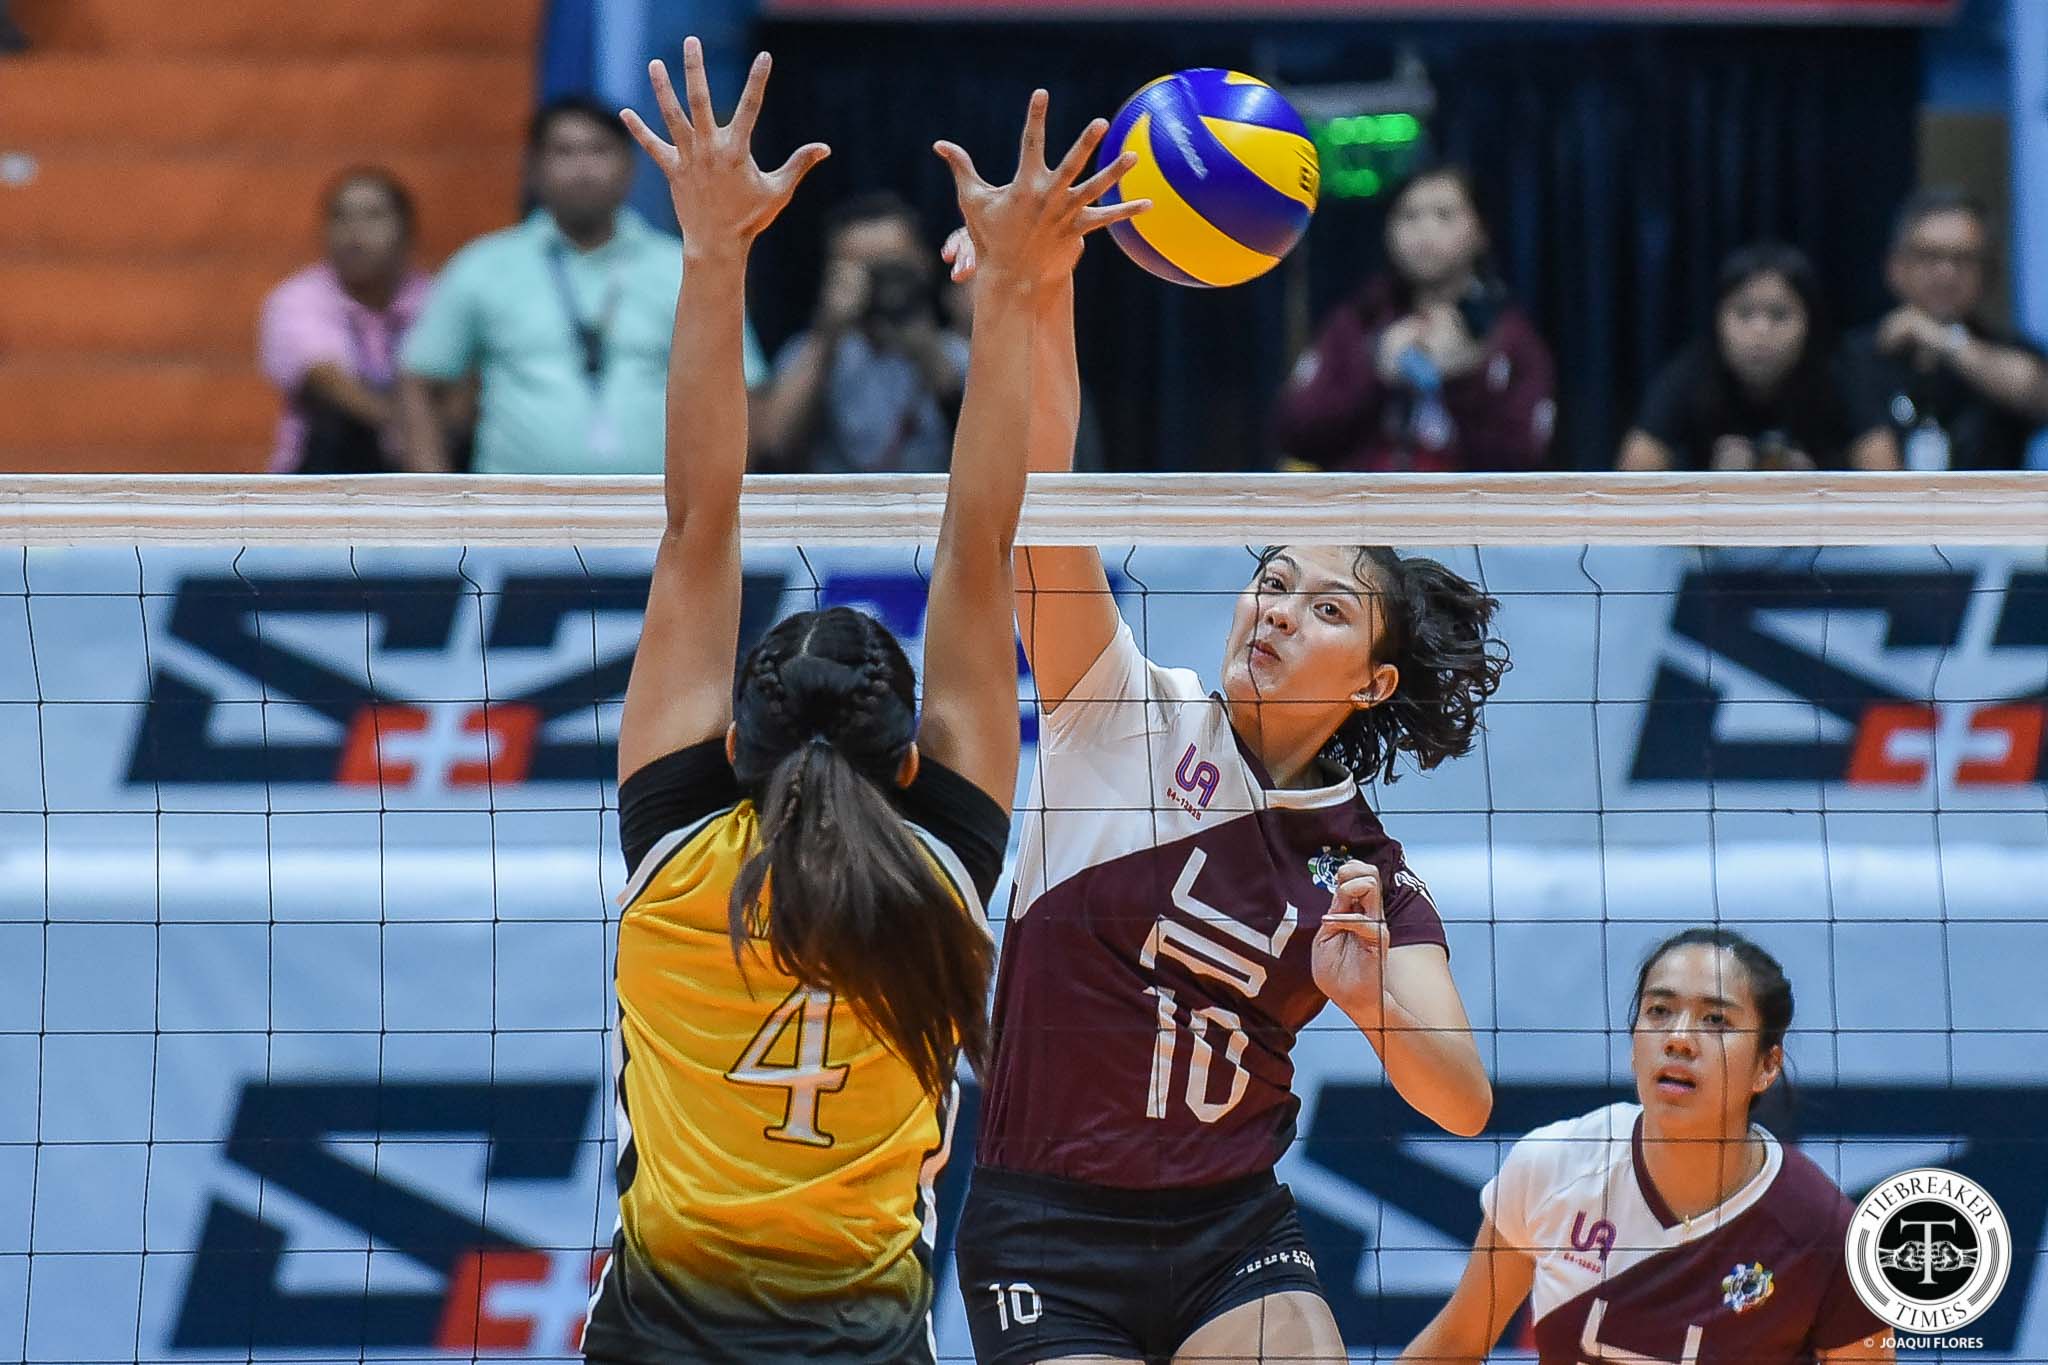 UAAP-81-Volleyball-UST-vs.-UP-Molde-9904 Irah Jaboneta shows what she learned from bro Janjan, Molde vs FEU News UAAP UP Volleyball  - philippine sports news